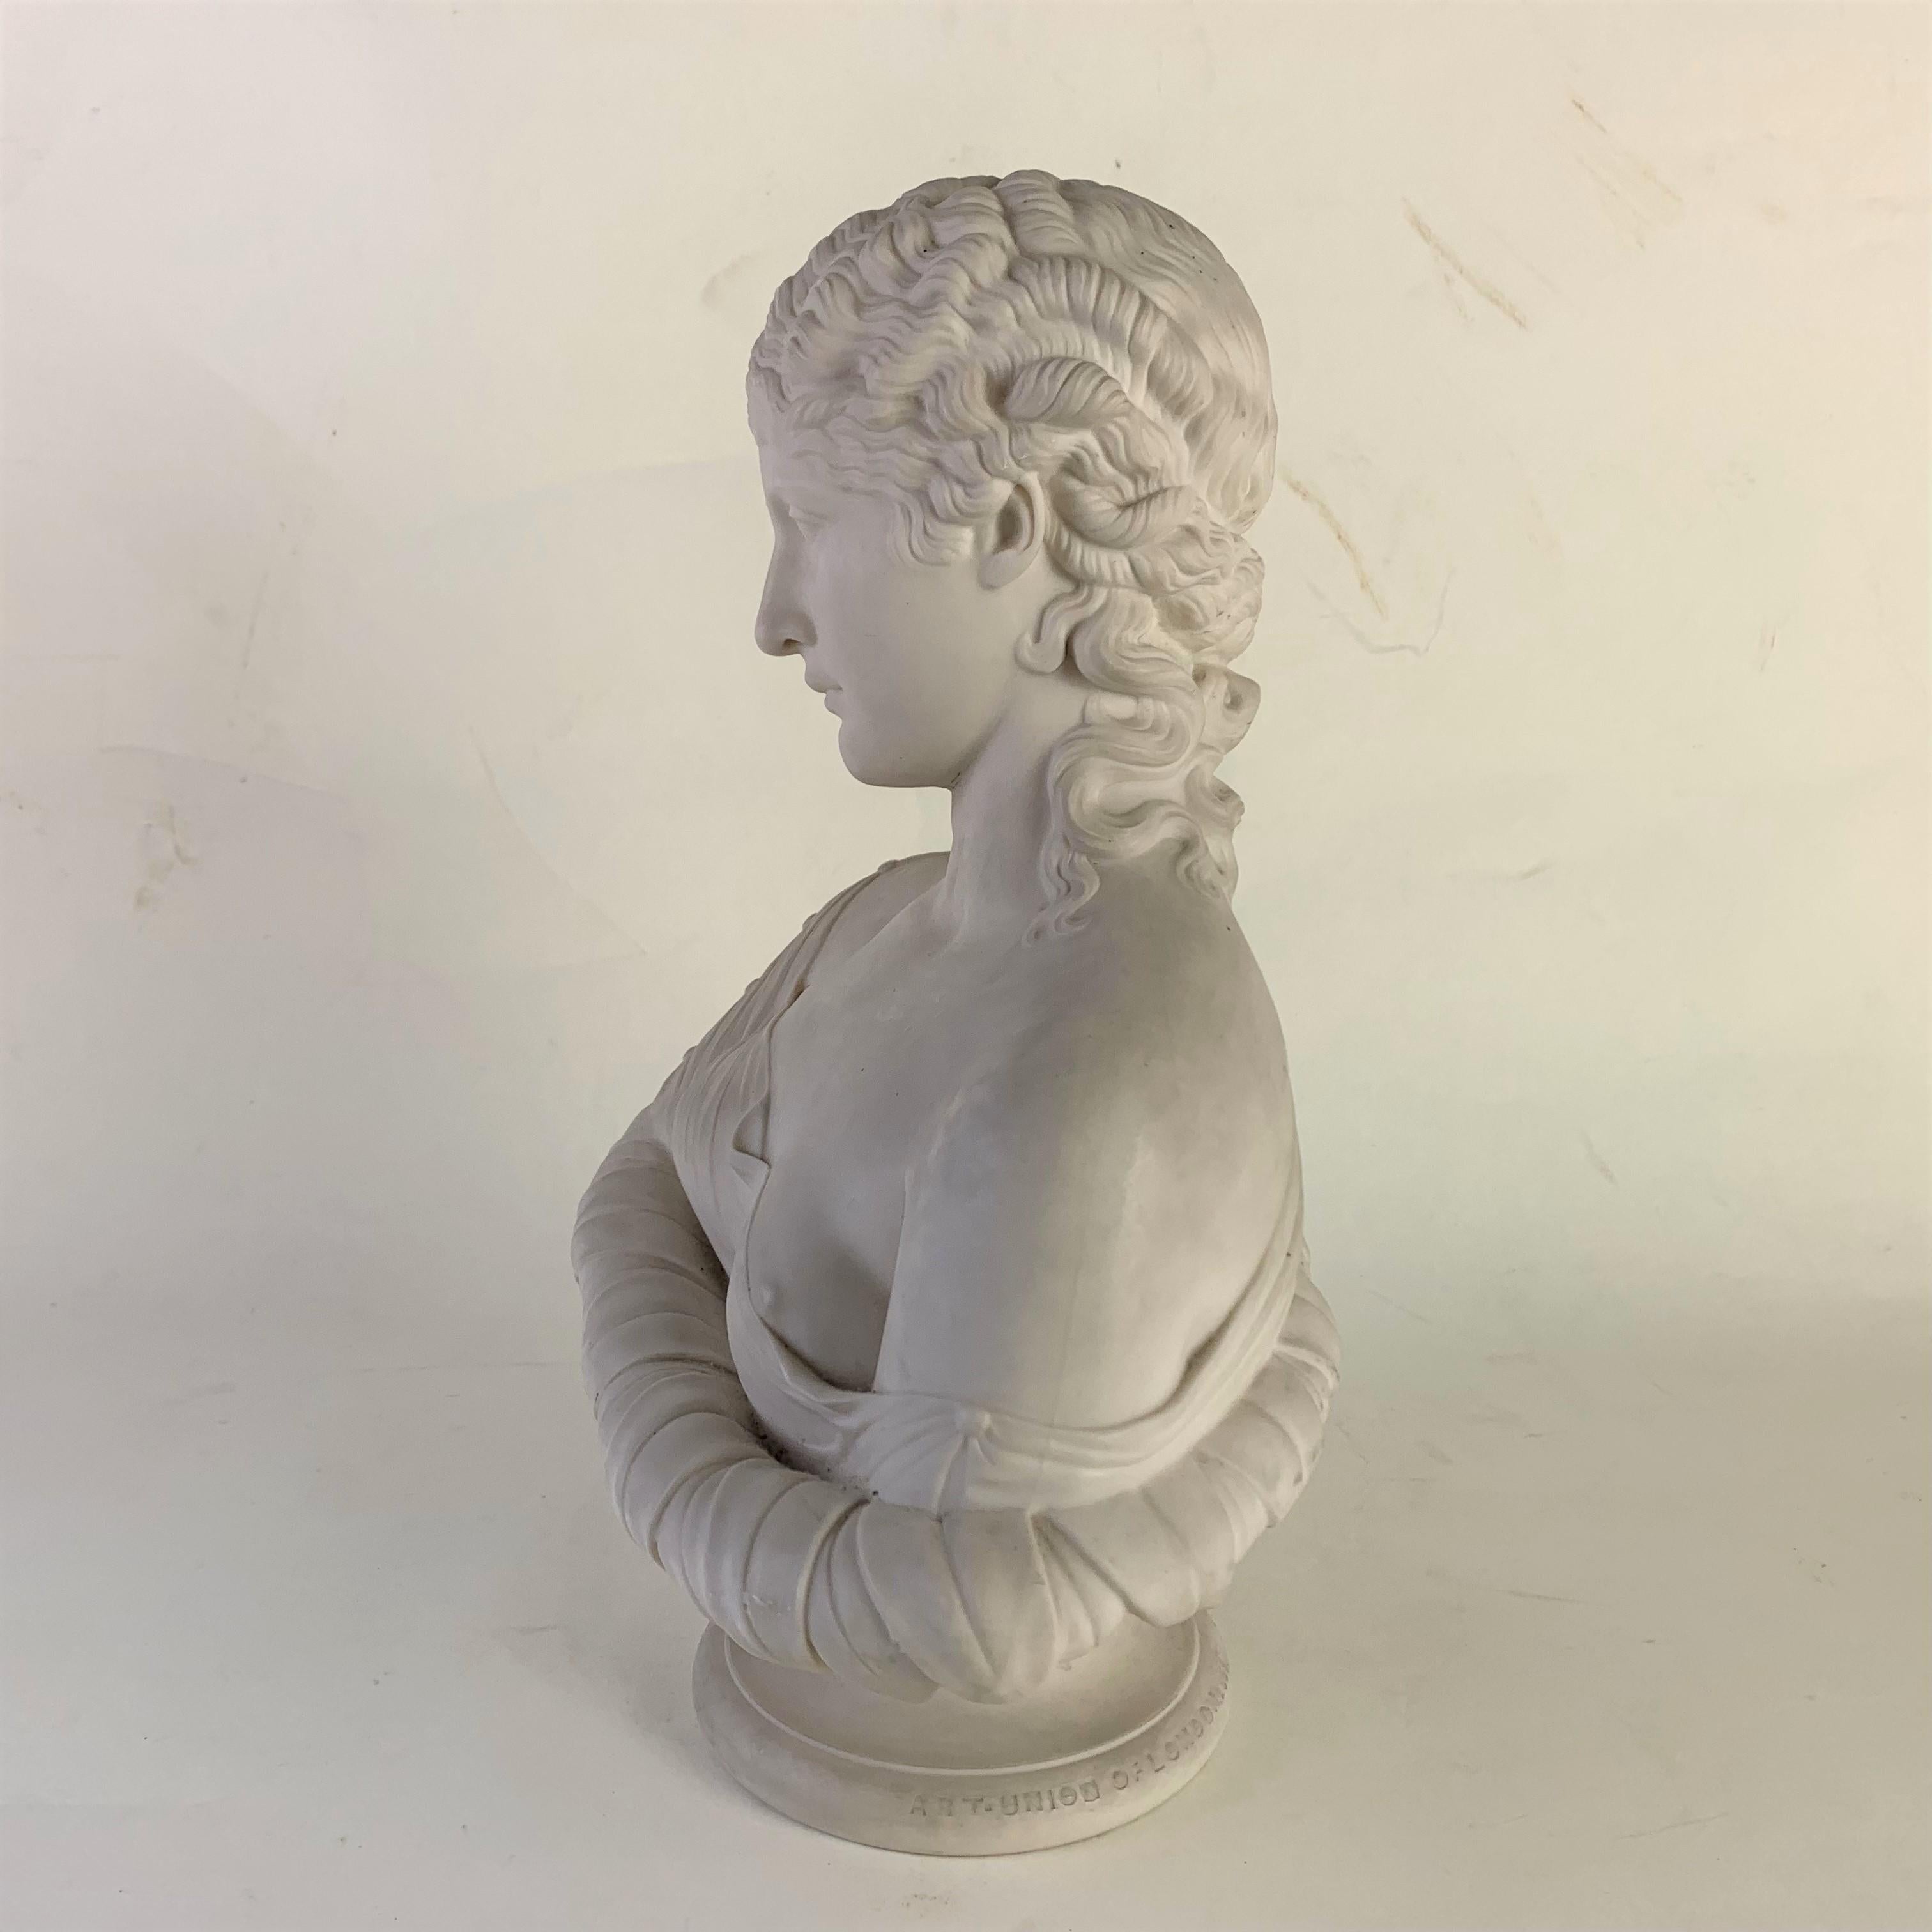 Late 19th century Parian bust of Clytie, a Greek water nymph and symbol of unrequited love.
In the legend Clytie, the deserted lover of Helios the sun, sat staring at the sun, following it throughout each day until eventually she was turned into a